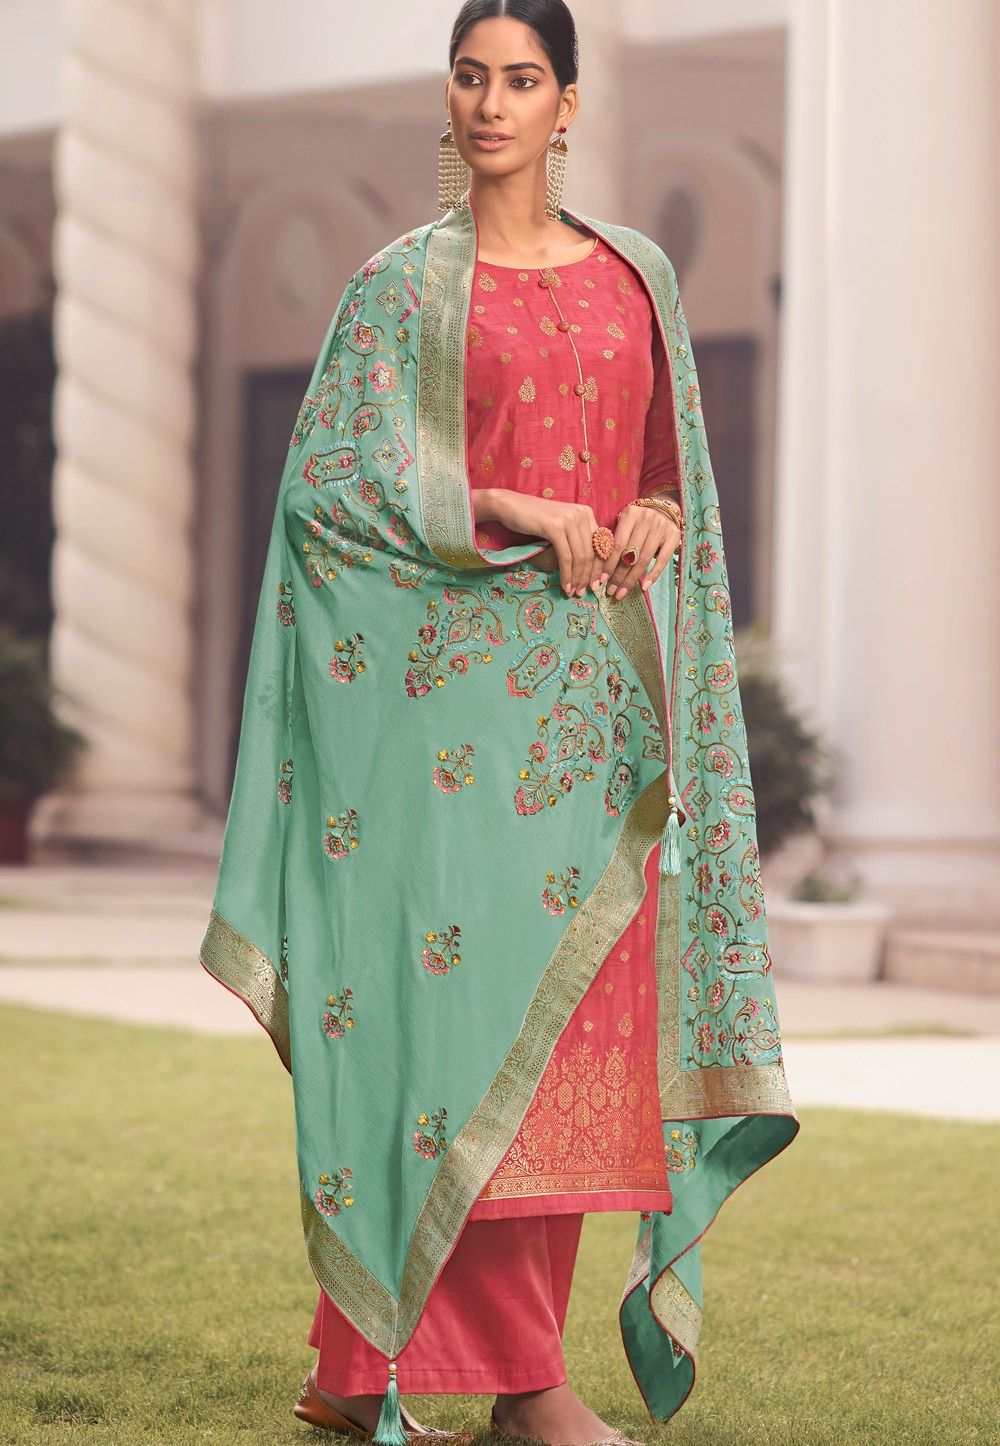 Effortless Chic: Mastering Casual Comfort with Palazzo Salwar Suits